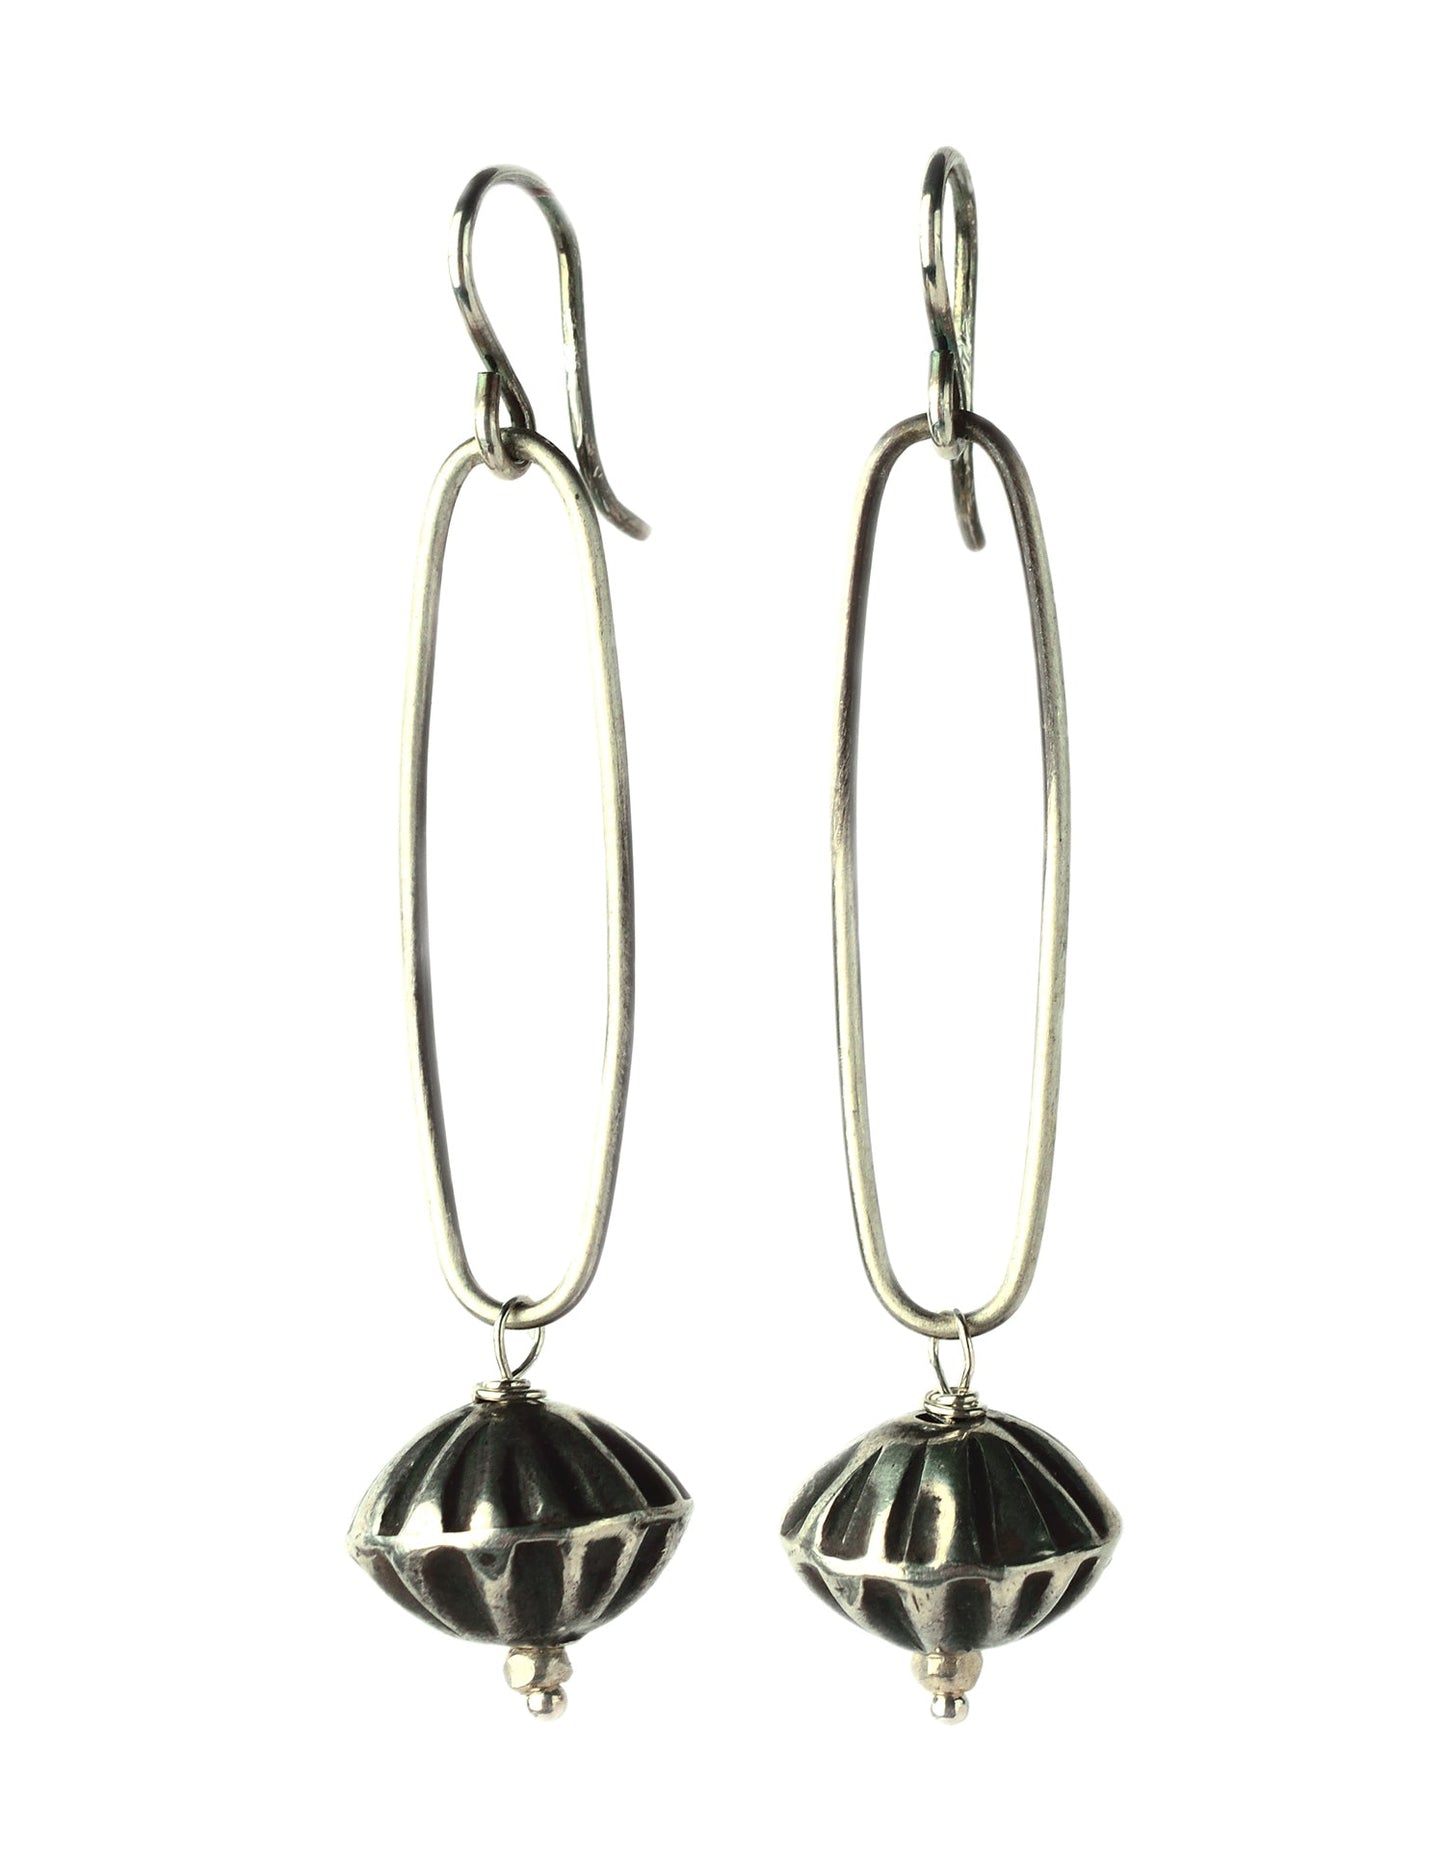 onujewelry.com - Bella Earrings with authentic Navajo Silver created by Donna Silvestri, On U Jewelry, Richmond, VA